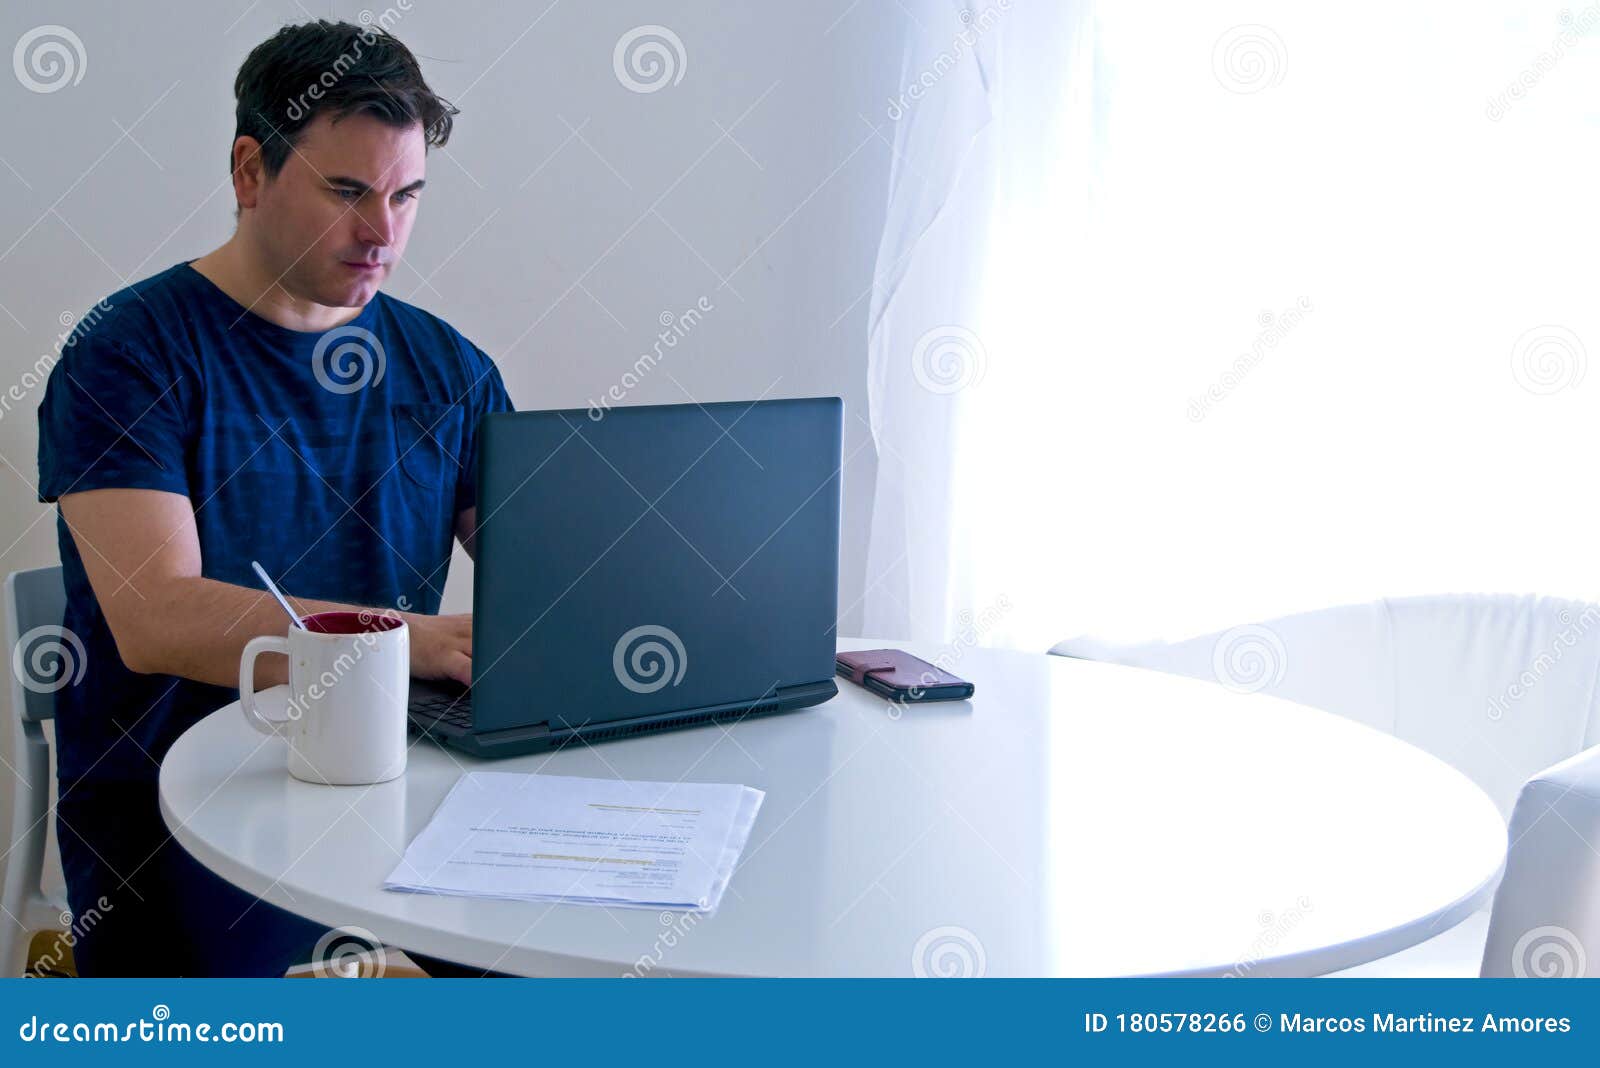 young man sitting and working on laptop at home. working father concept. teleworking concept